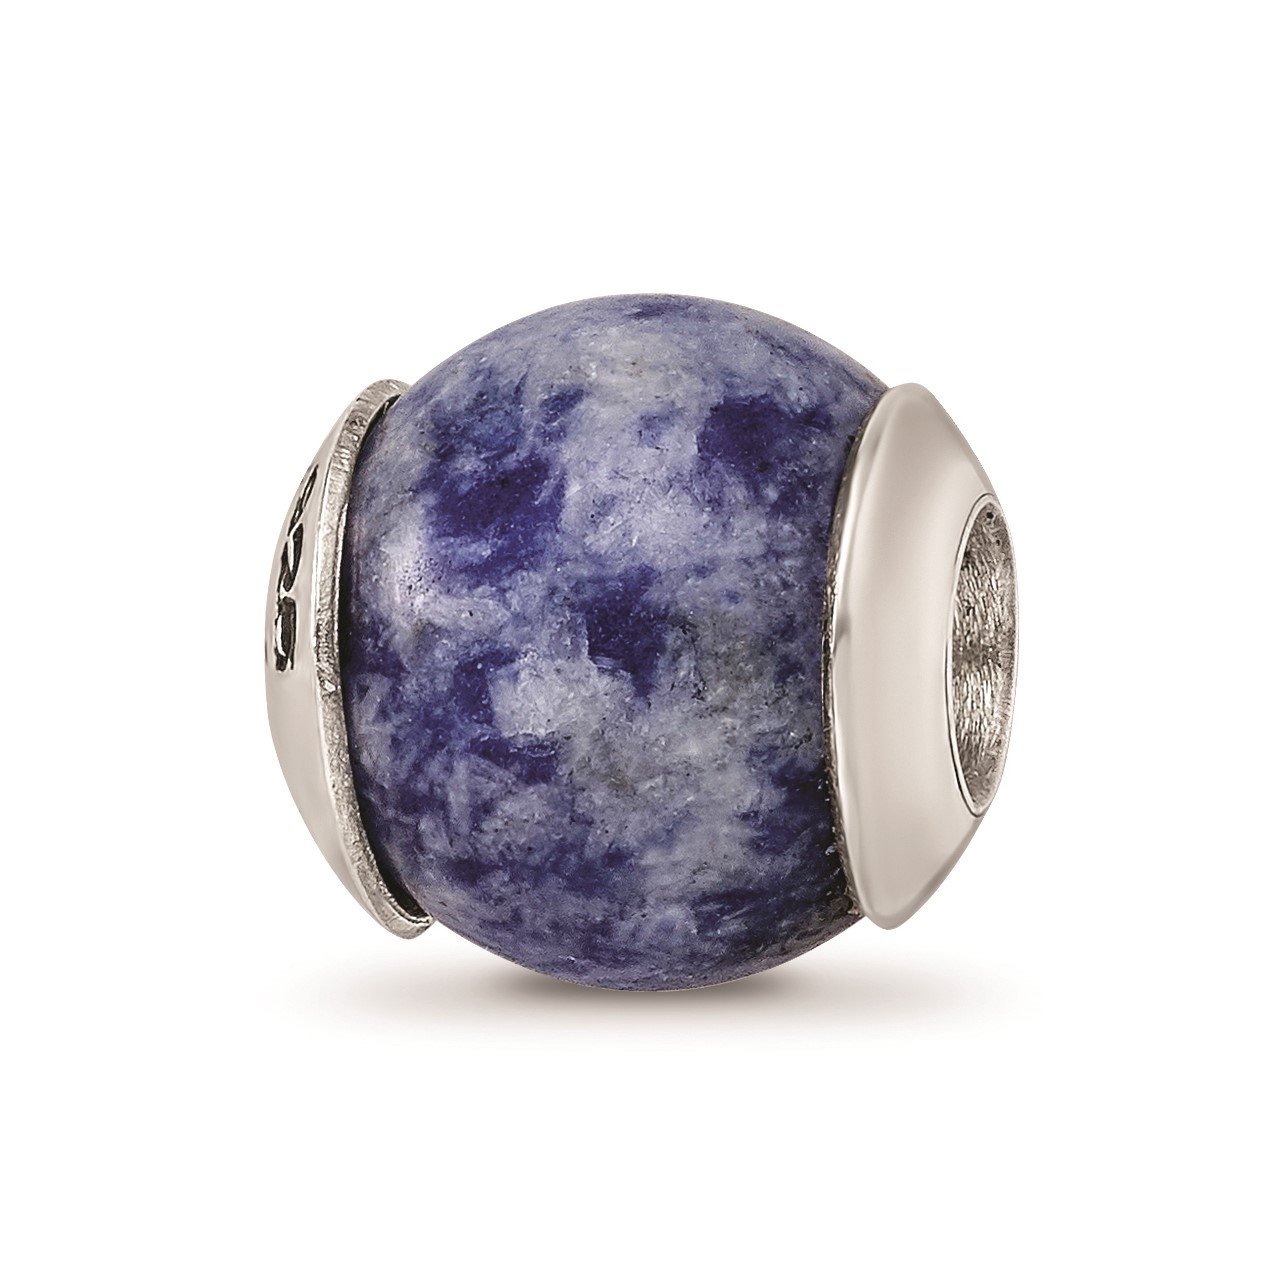 Sterling Silver Reflections Sodalite Stone Bead